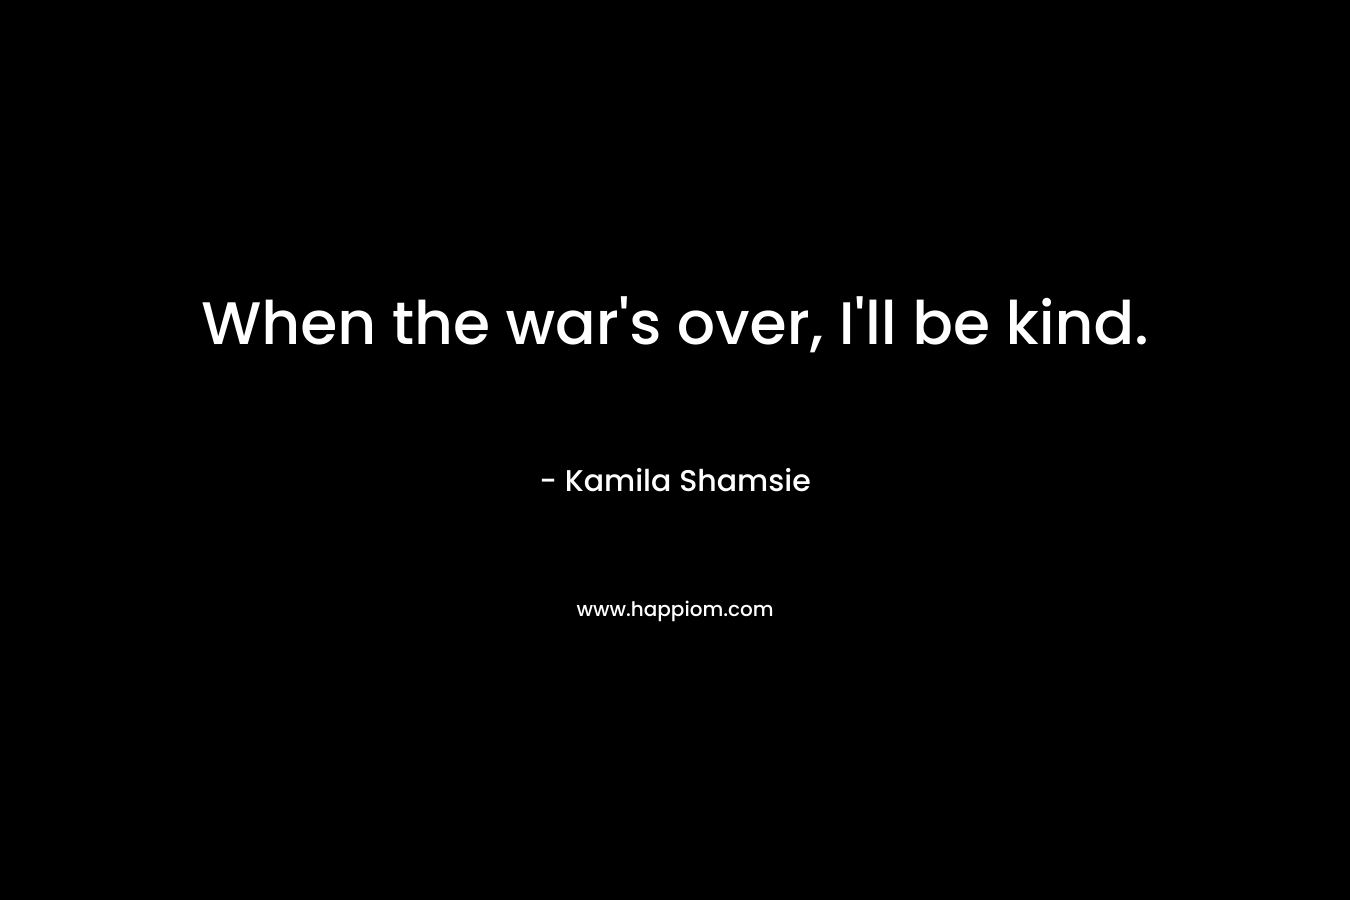 When the war's over, I'll be kind.